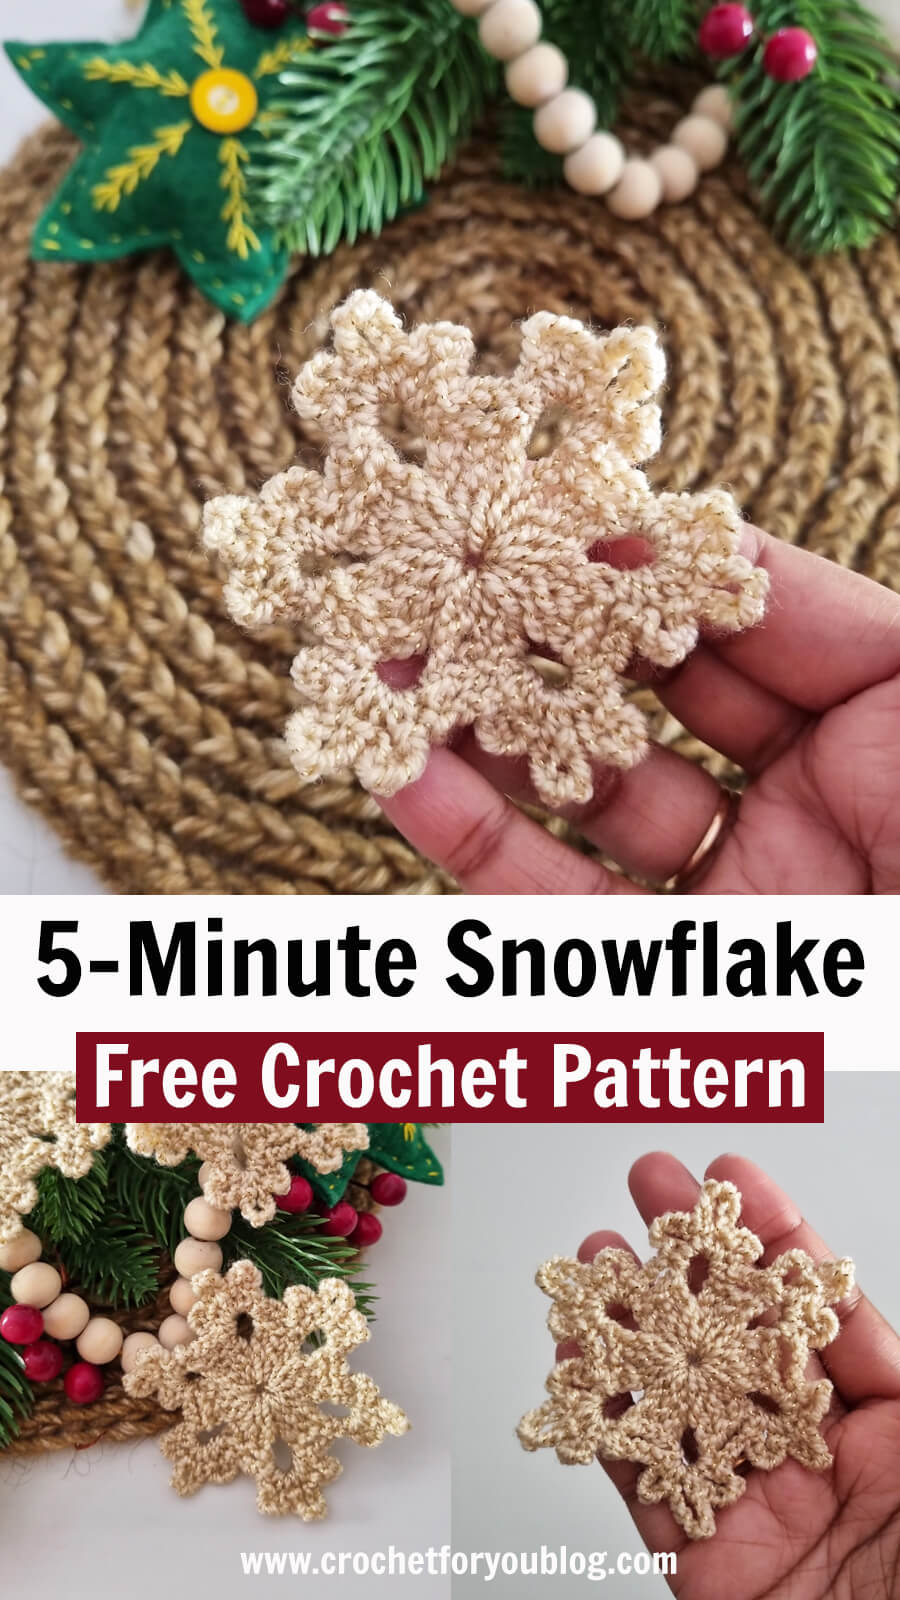 Redesigned new 5-minutes snowflake pattern